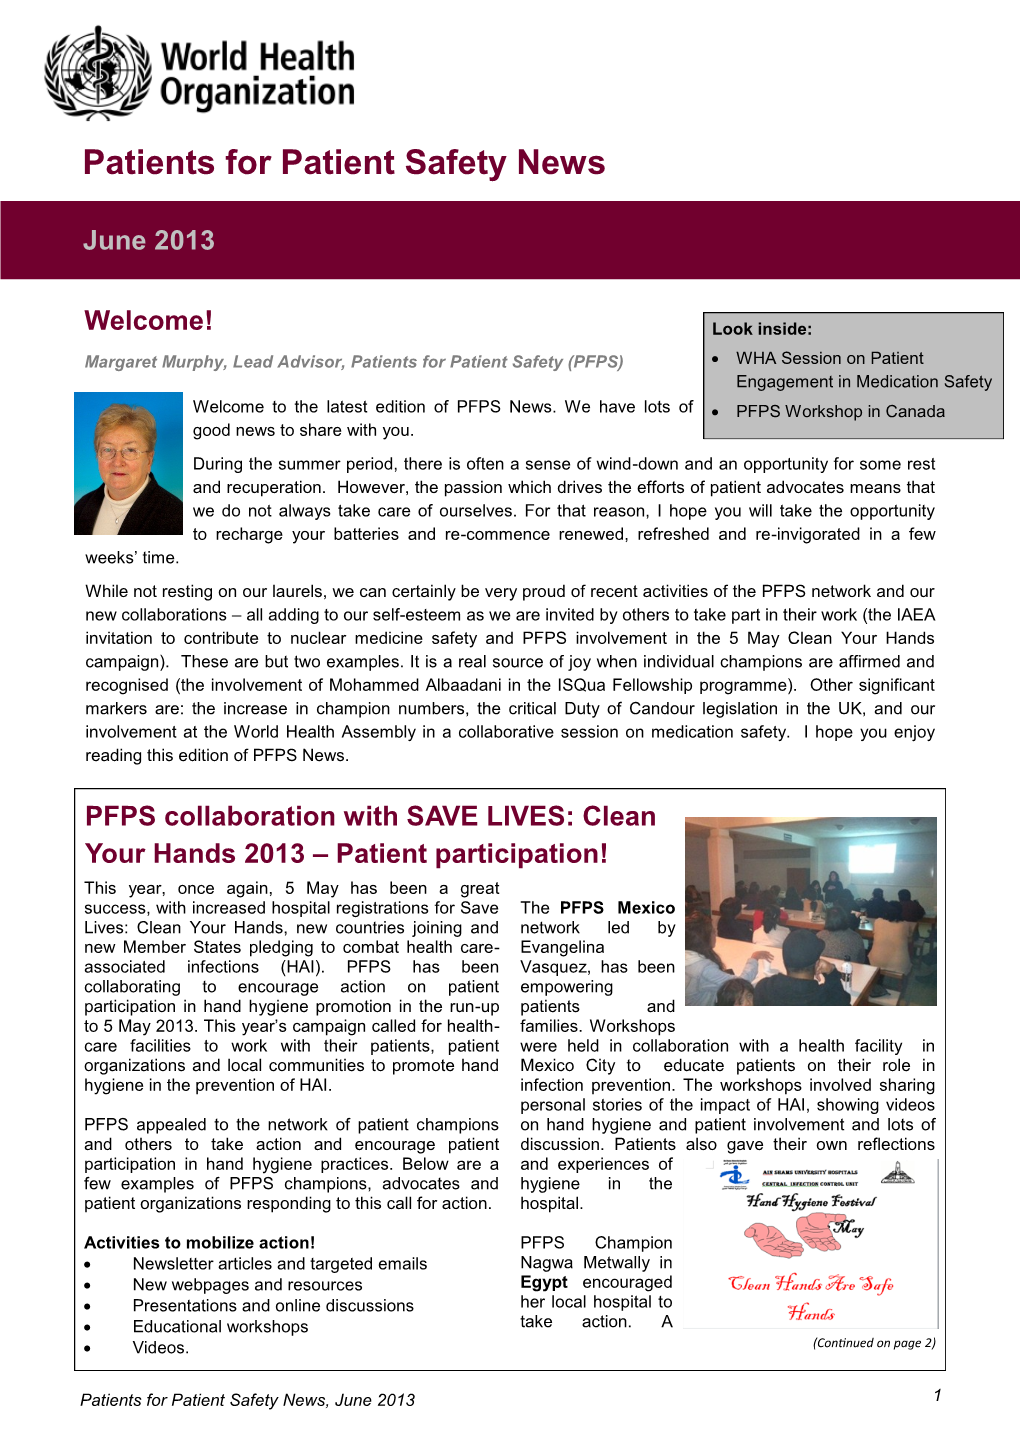 Patients for Patient Safety News